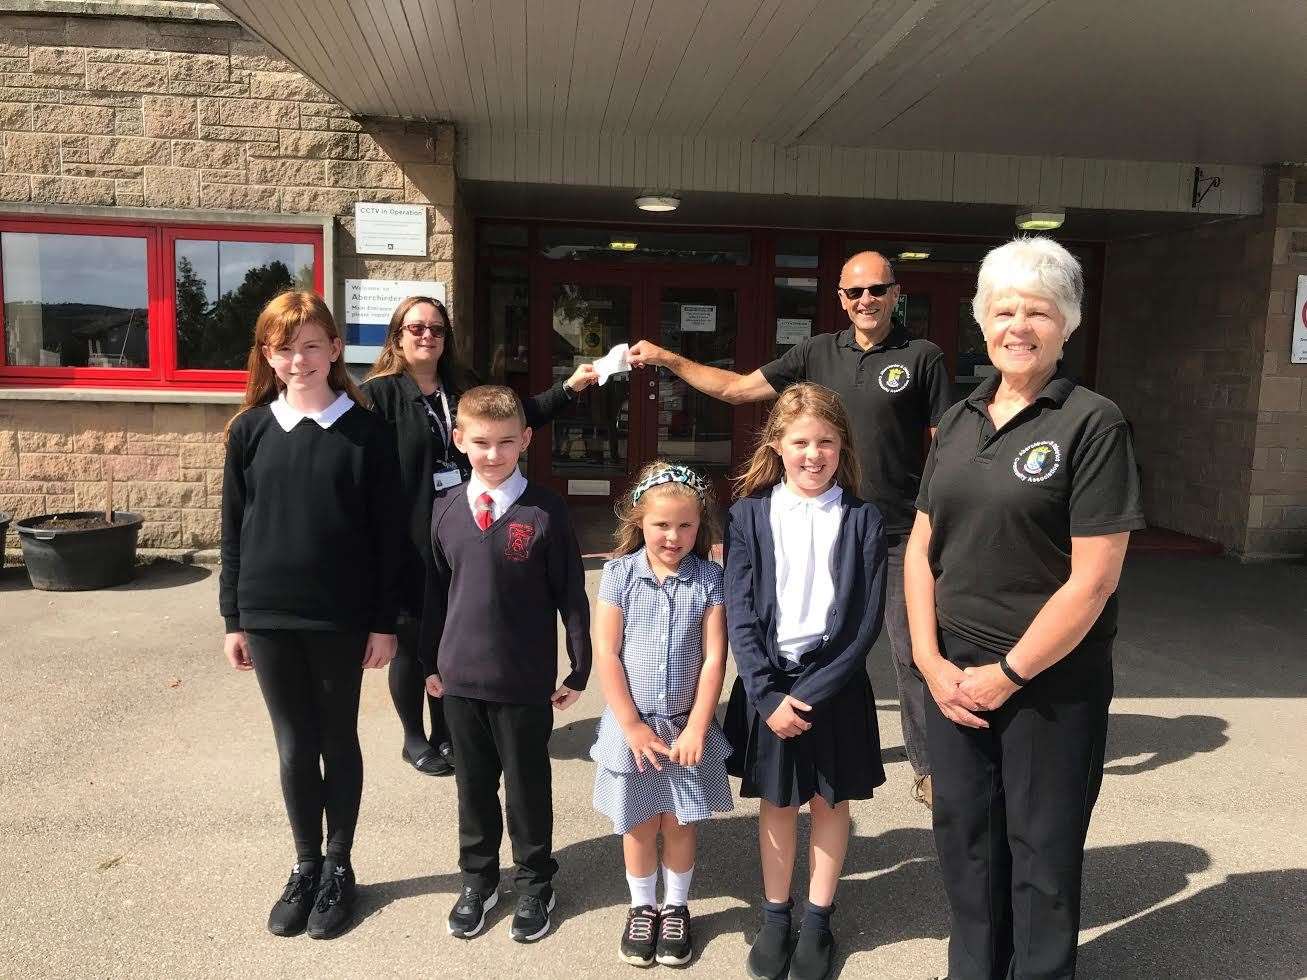 Pupils Imogen Duncan, Archie Donald, Becca Brown, Olivia Brown welcomed Brenda King and Richard Waters who handed over the cheque to Jennifer Astridge.